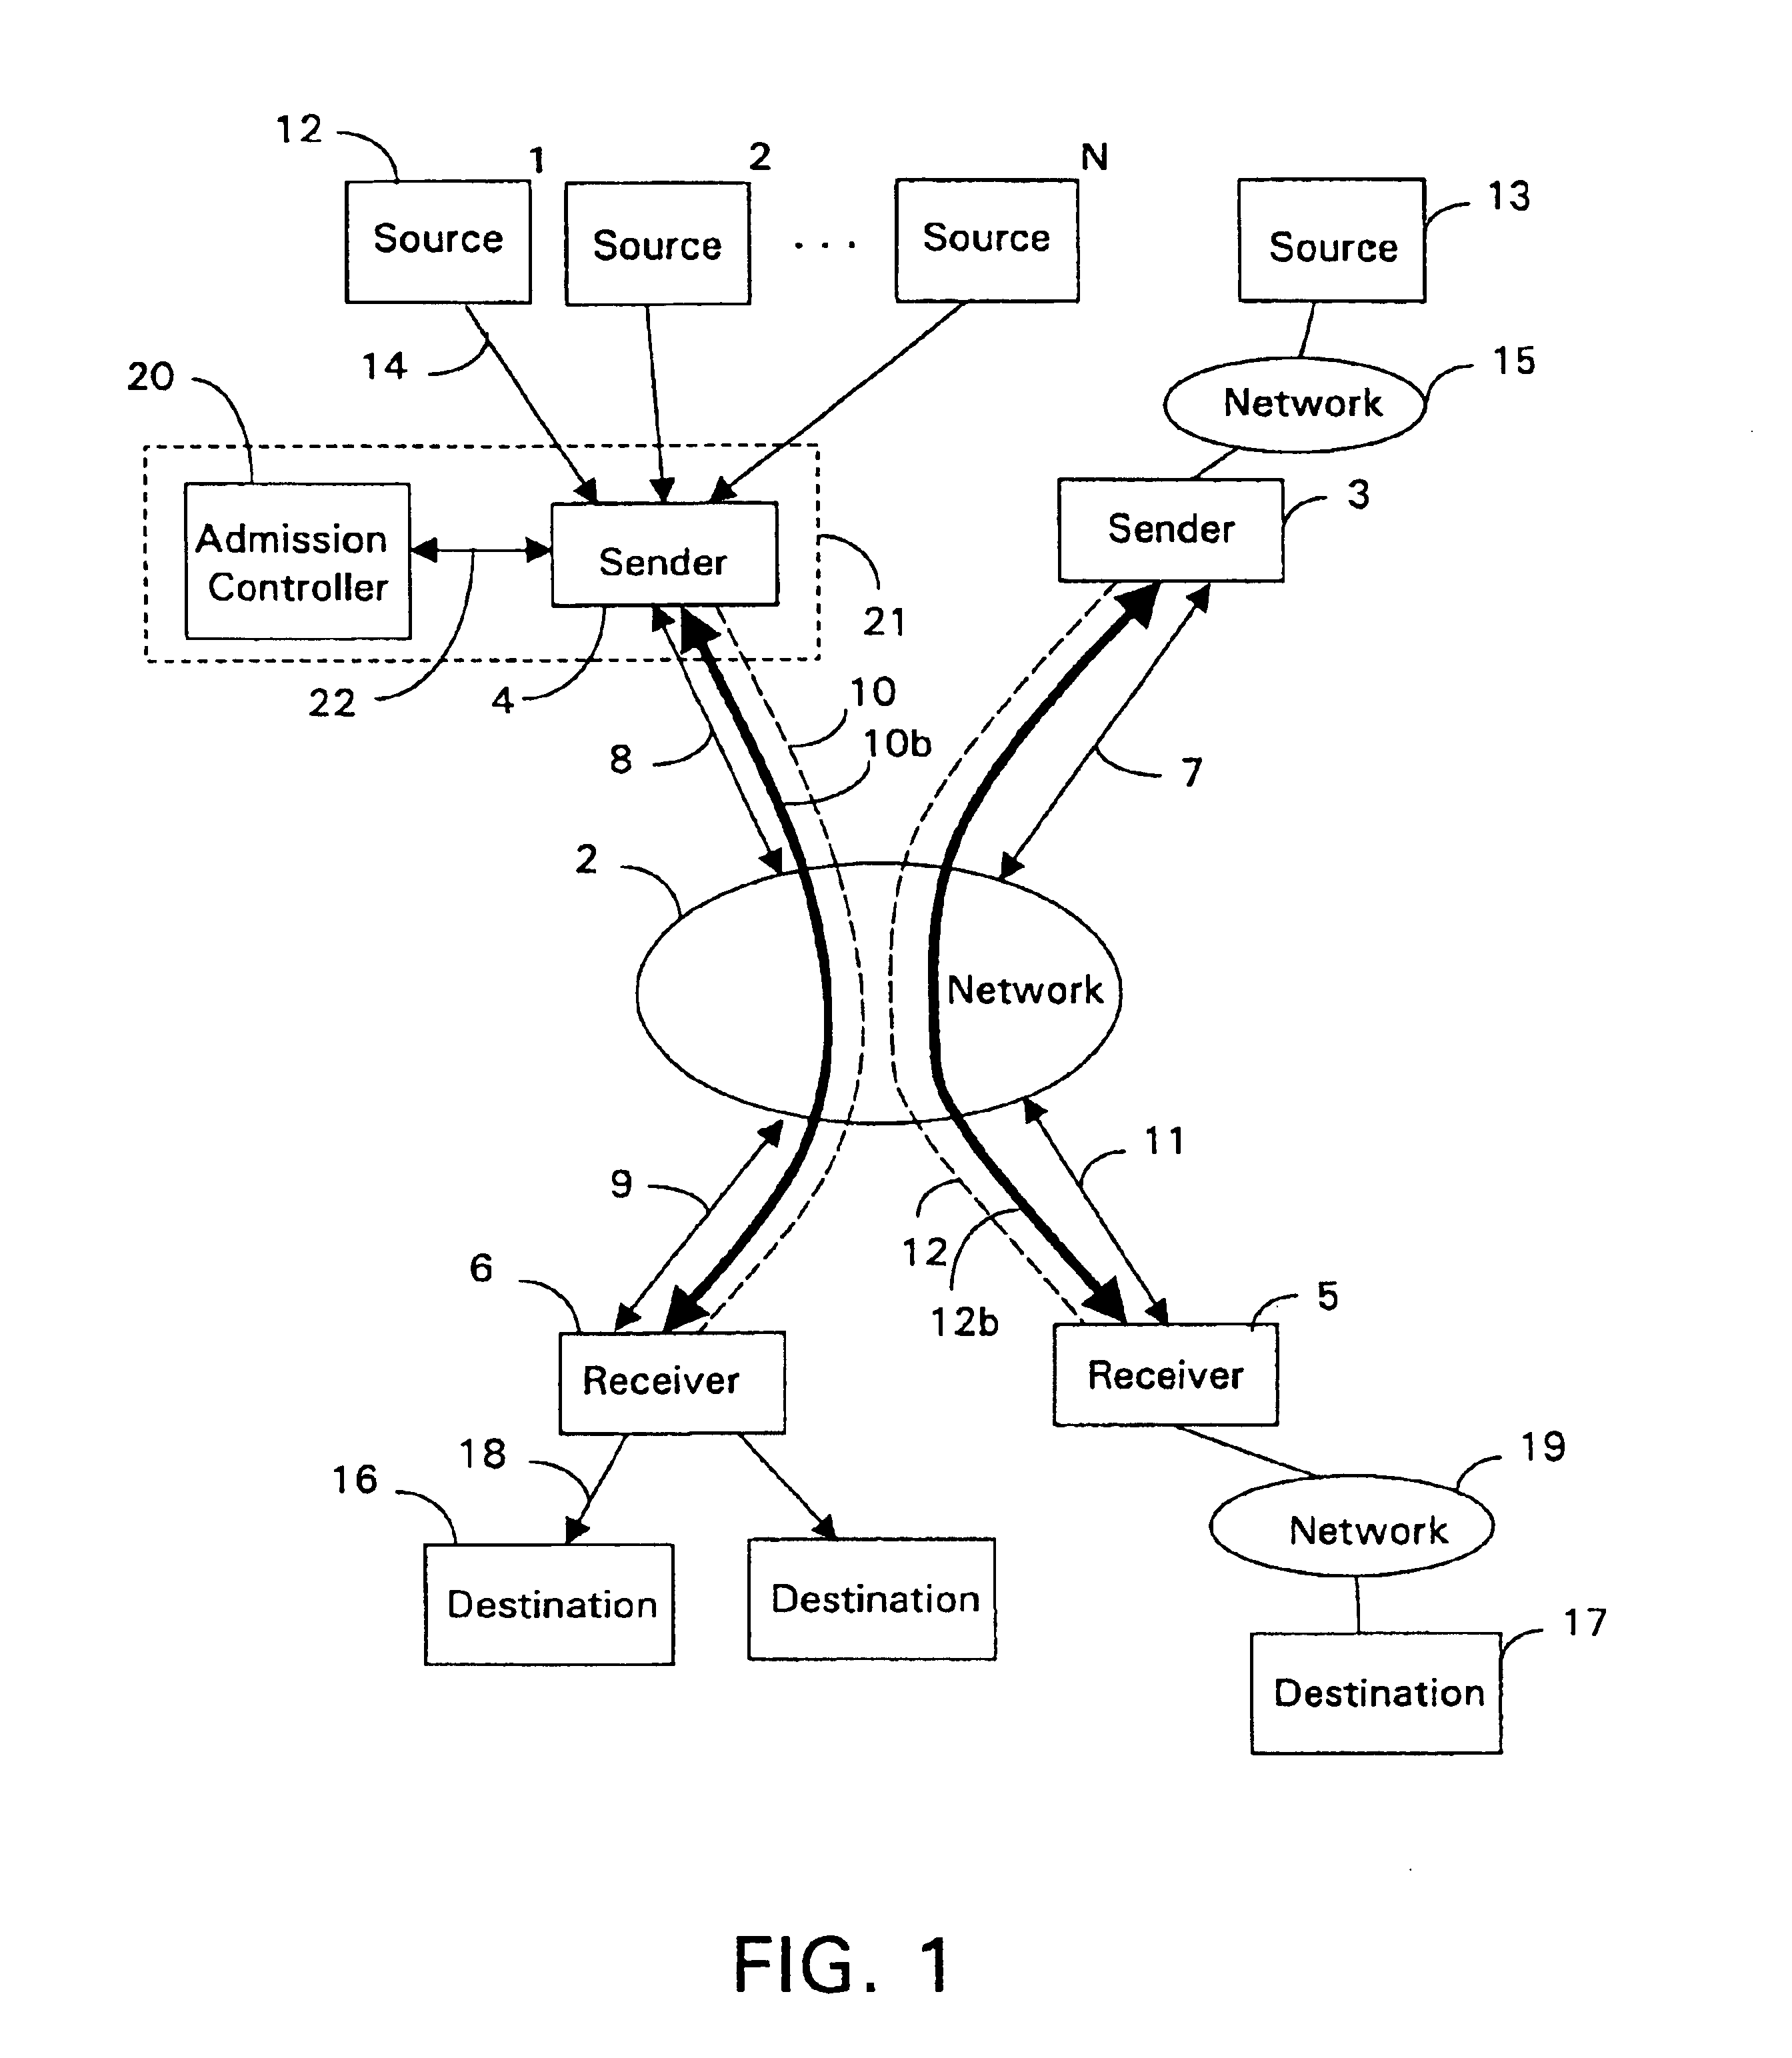 Admission control for aggregate data flows based on a threshold adjusted according to the frequency of traffic congestion notification